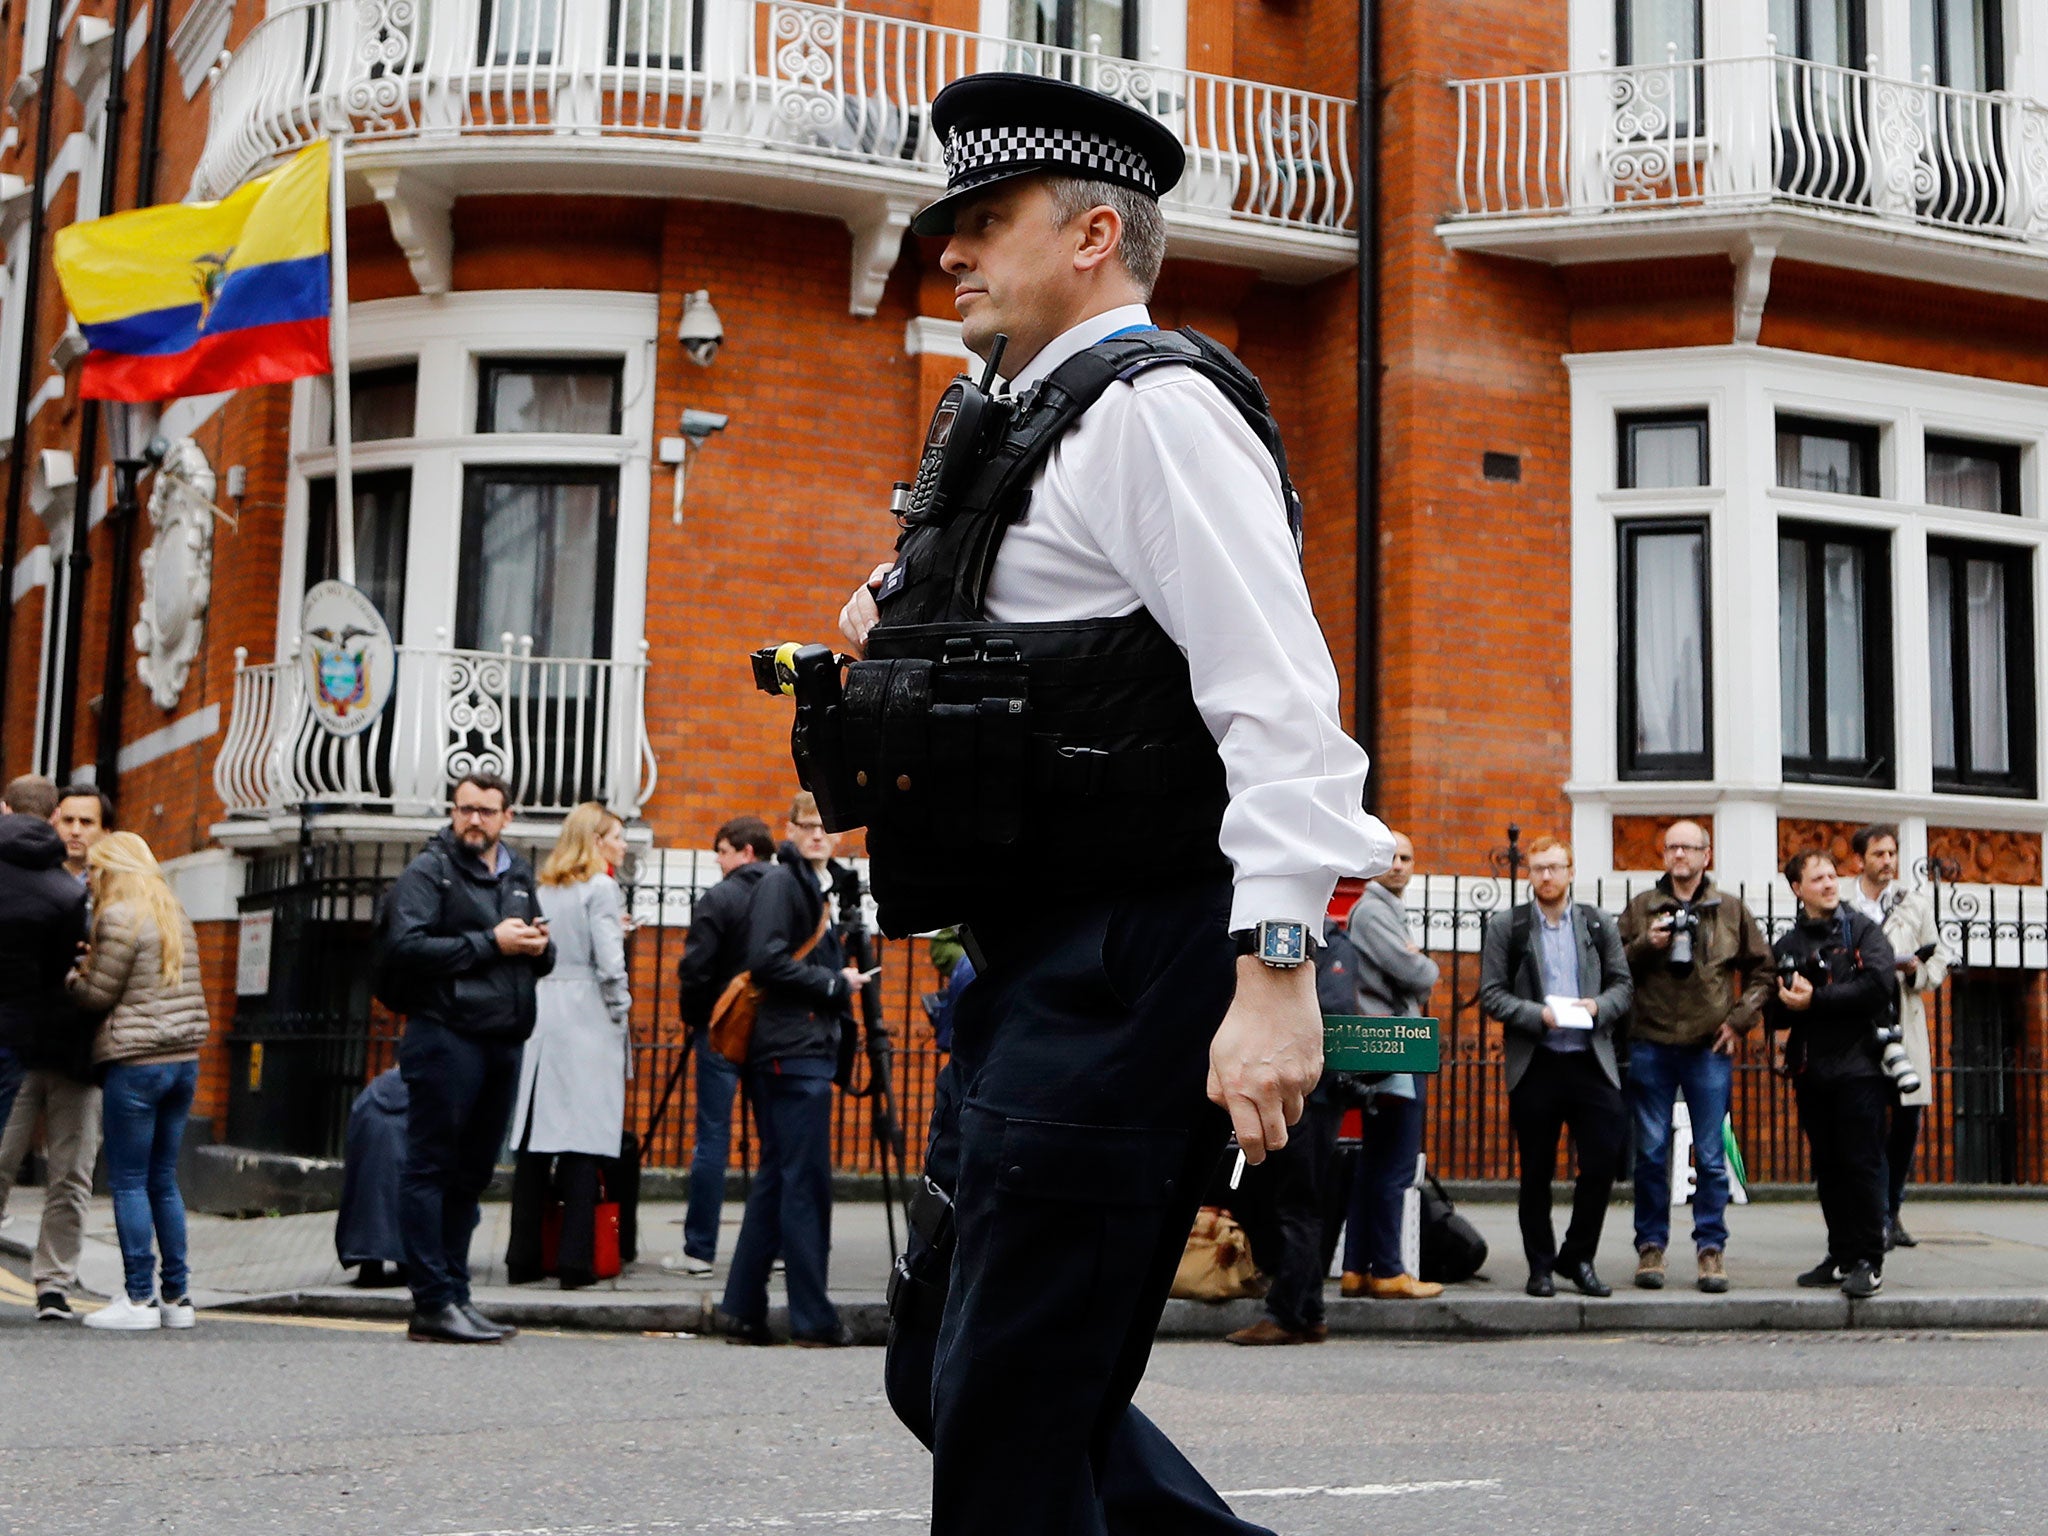 A police officer walks past people gathering outside the Ecuadorian embassy in London on 19 May